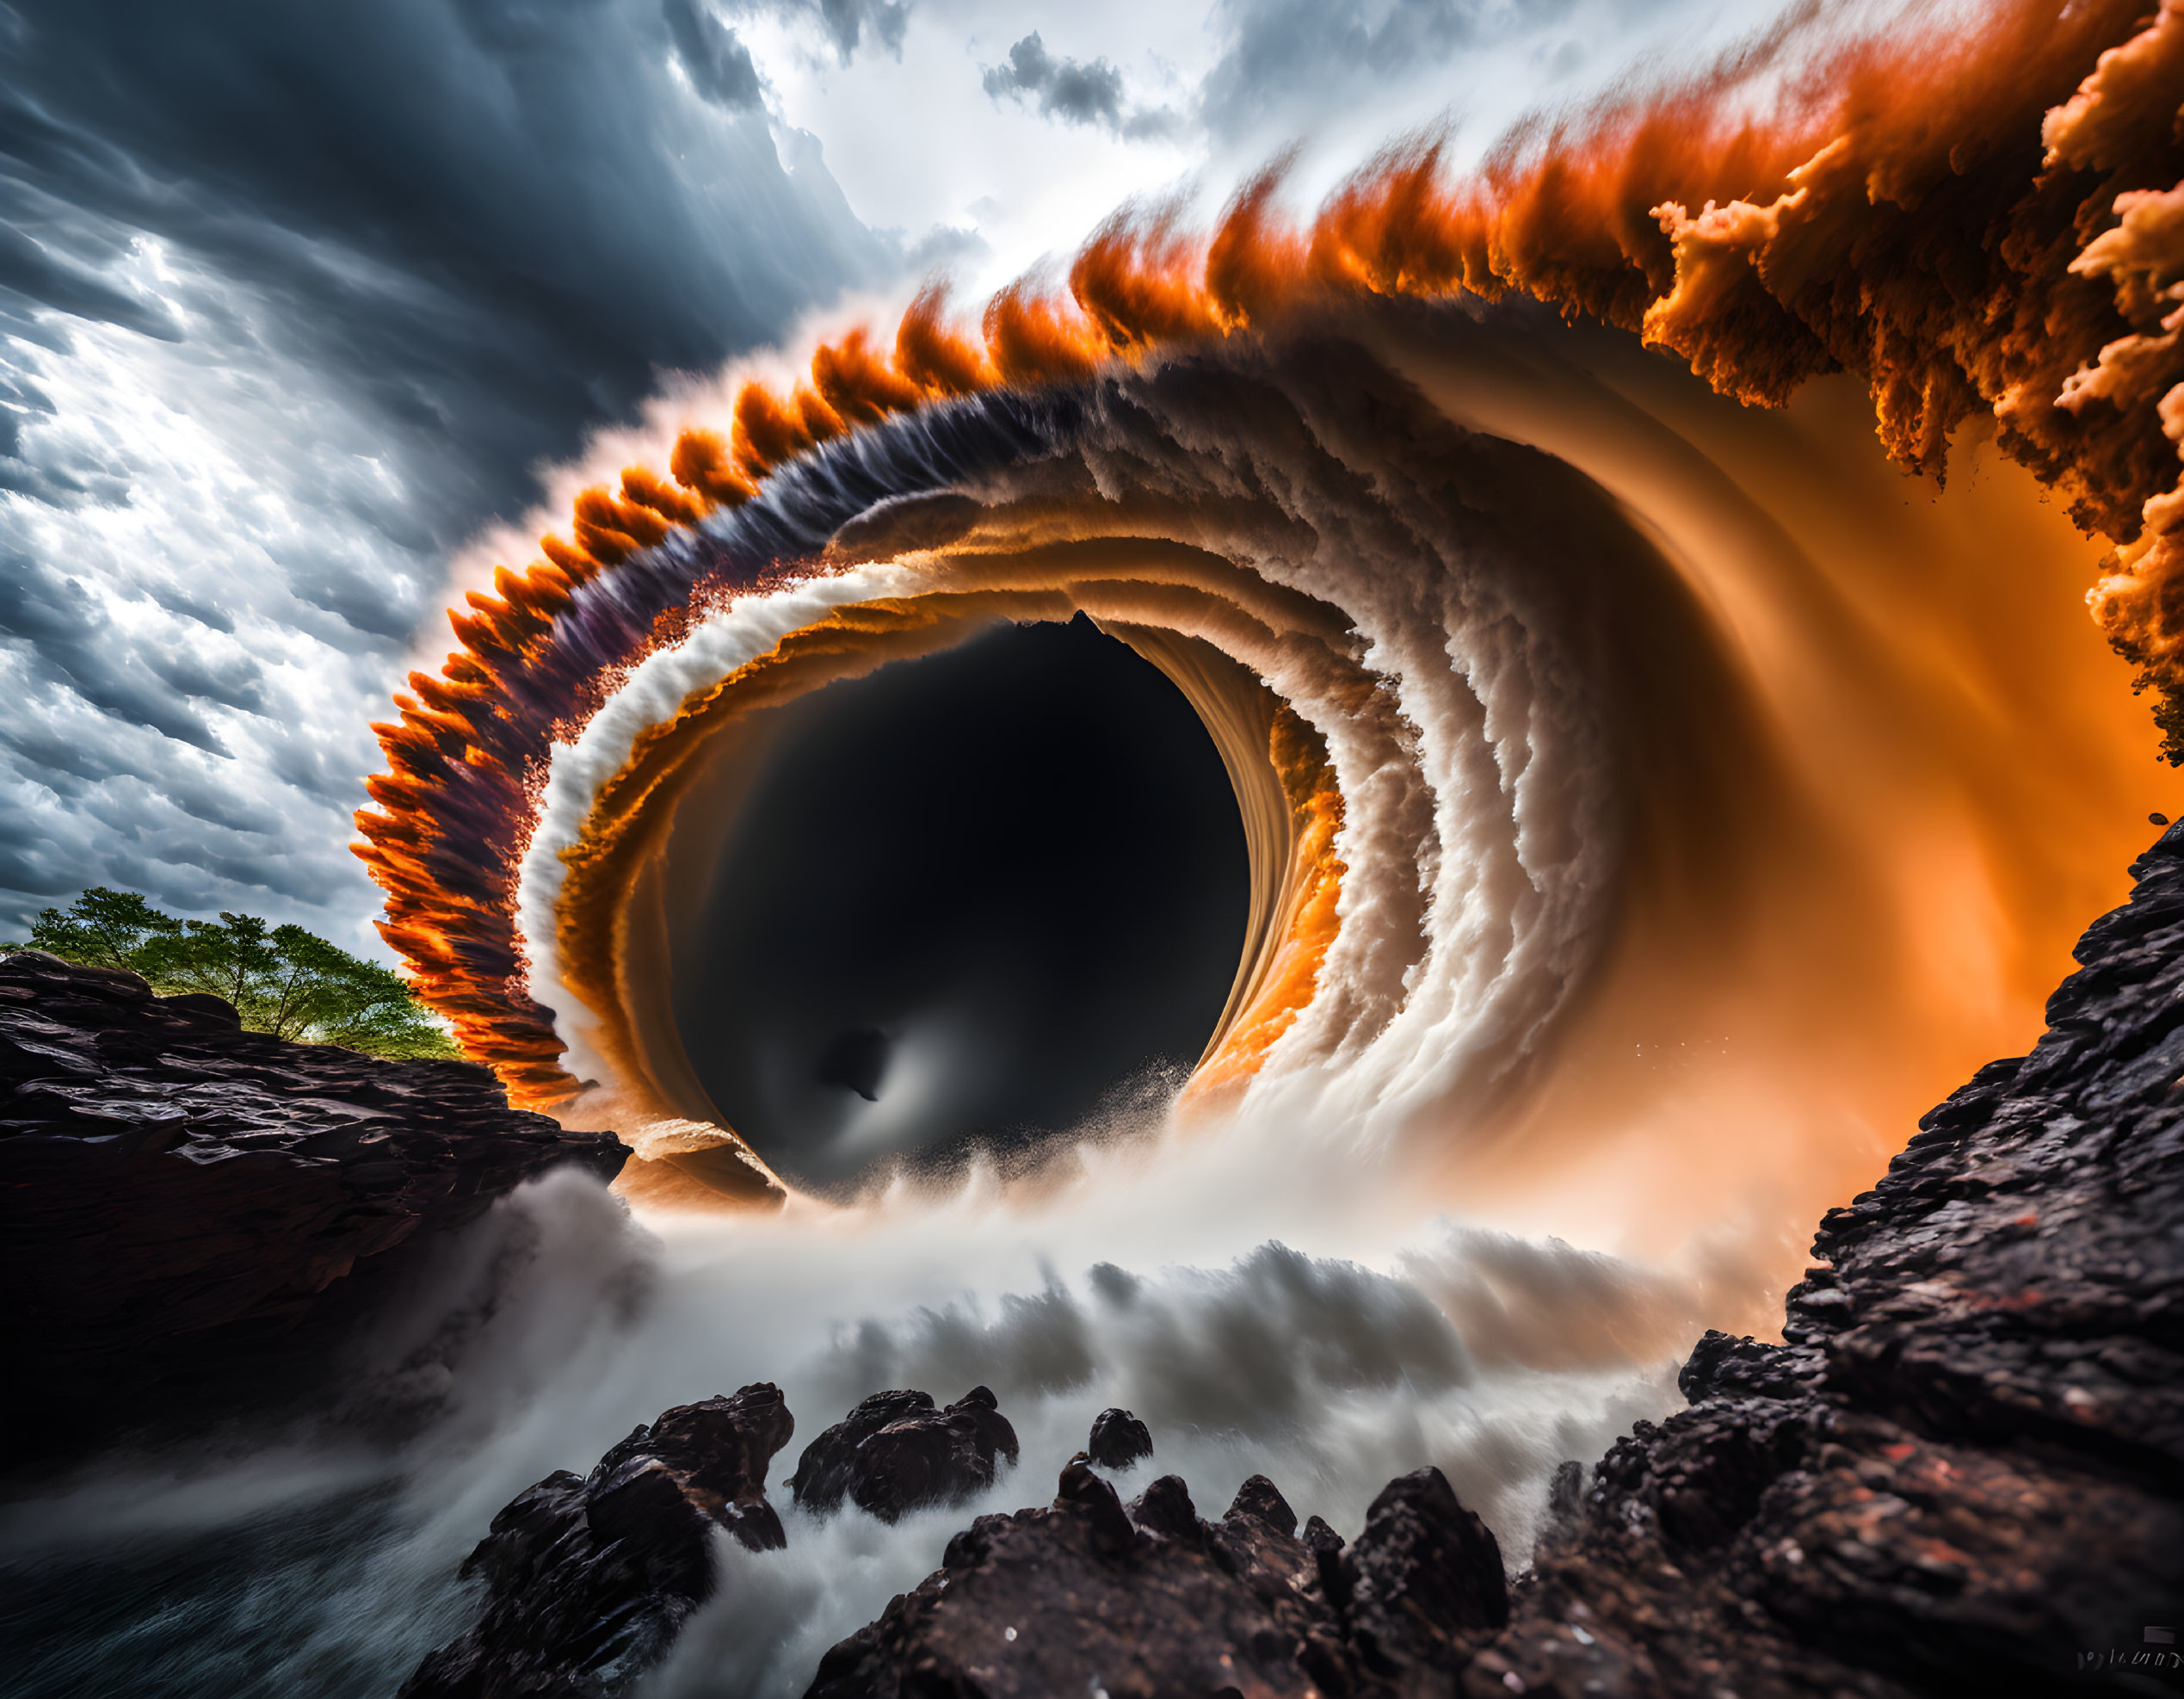 Surreal swirling orange and black vortex in the sky over rocky terrain